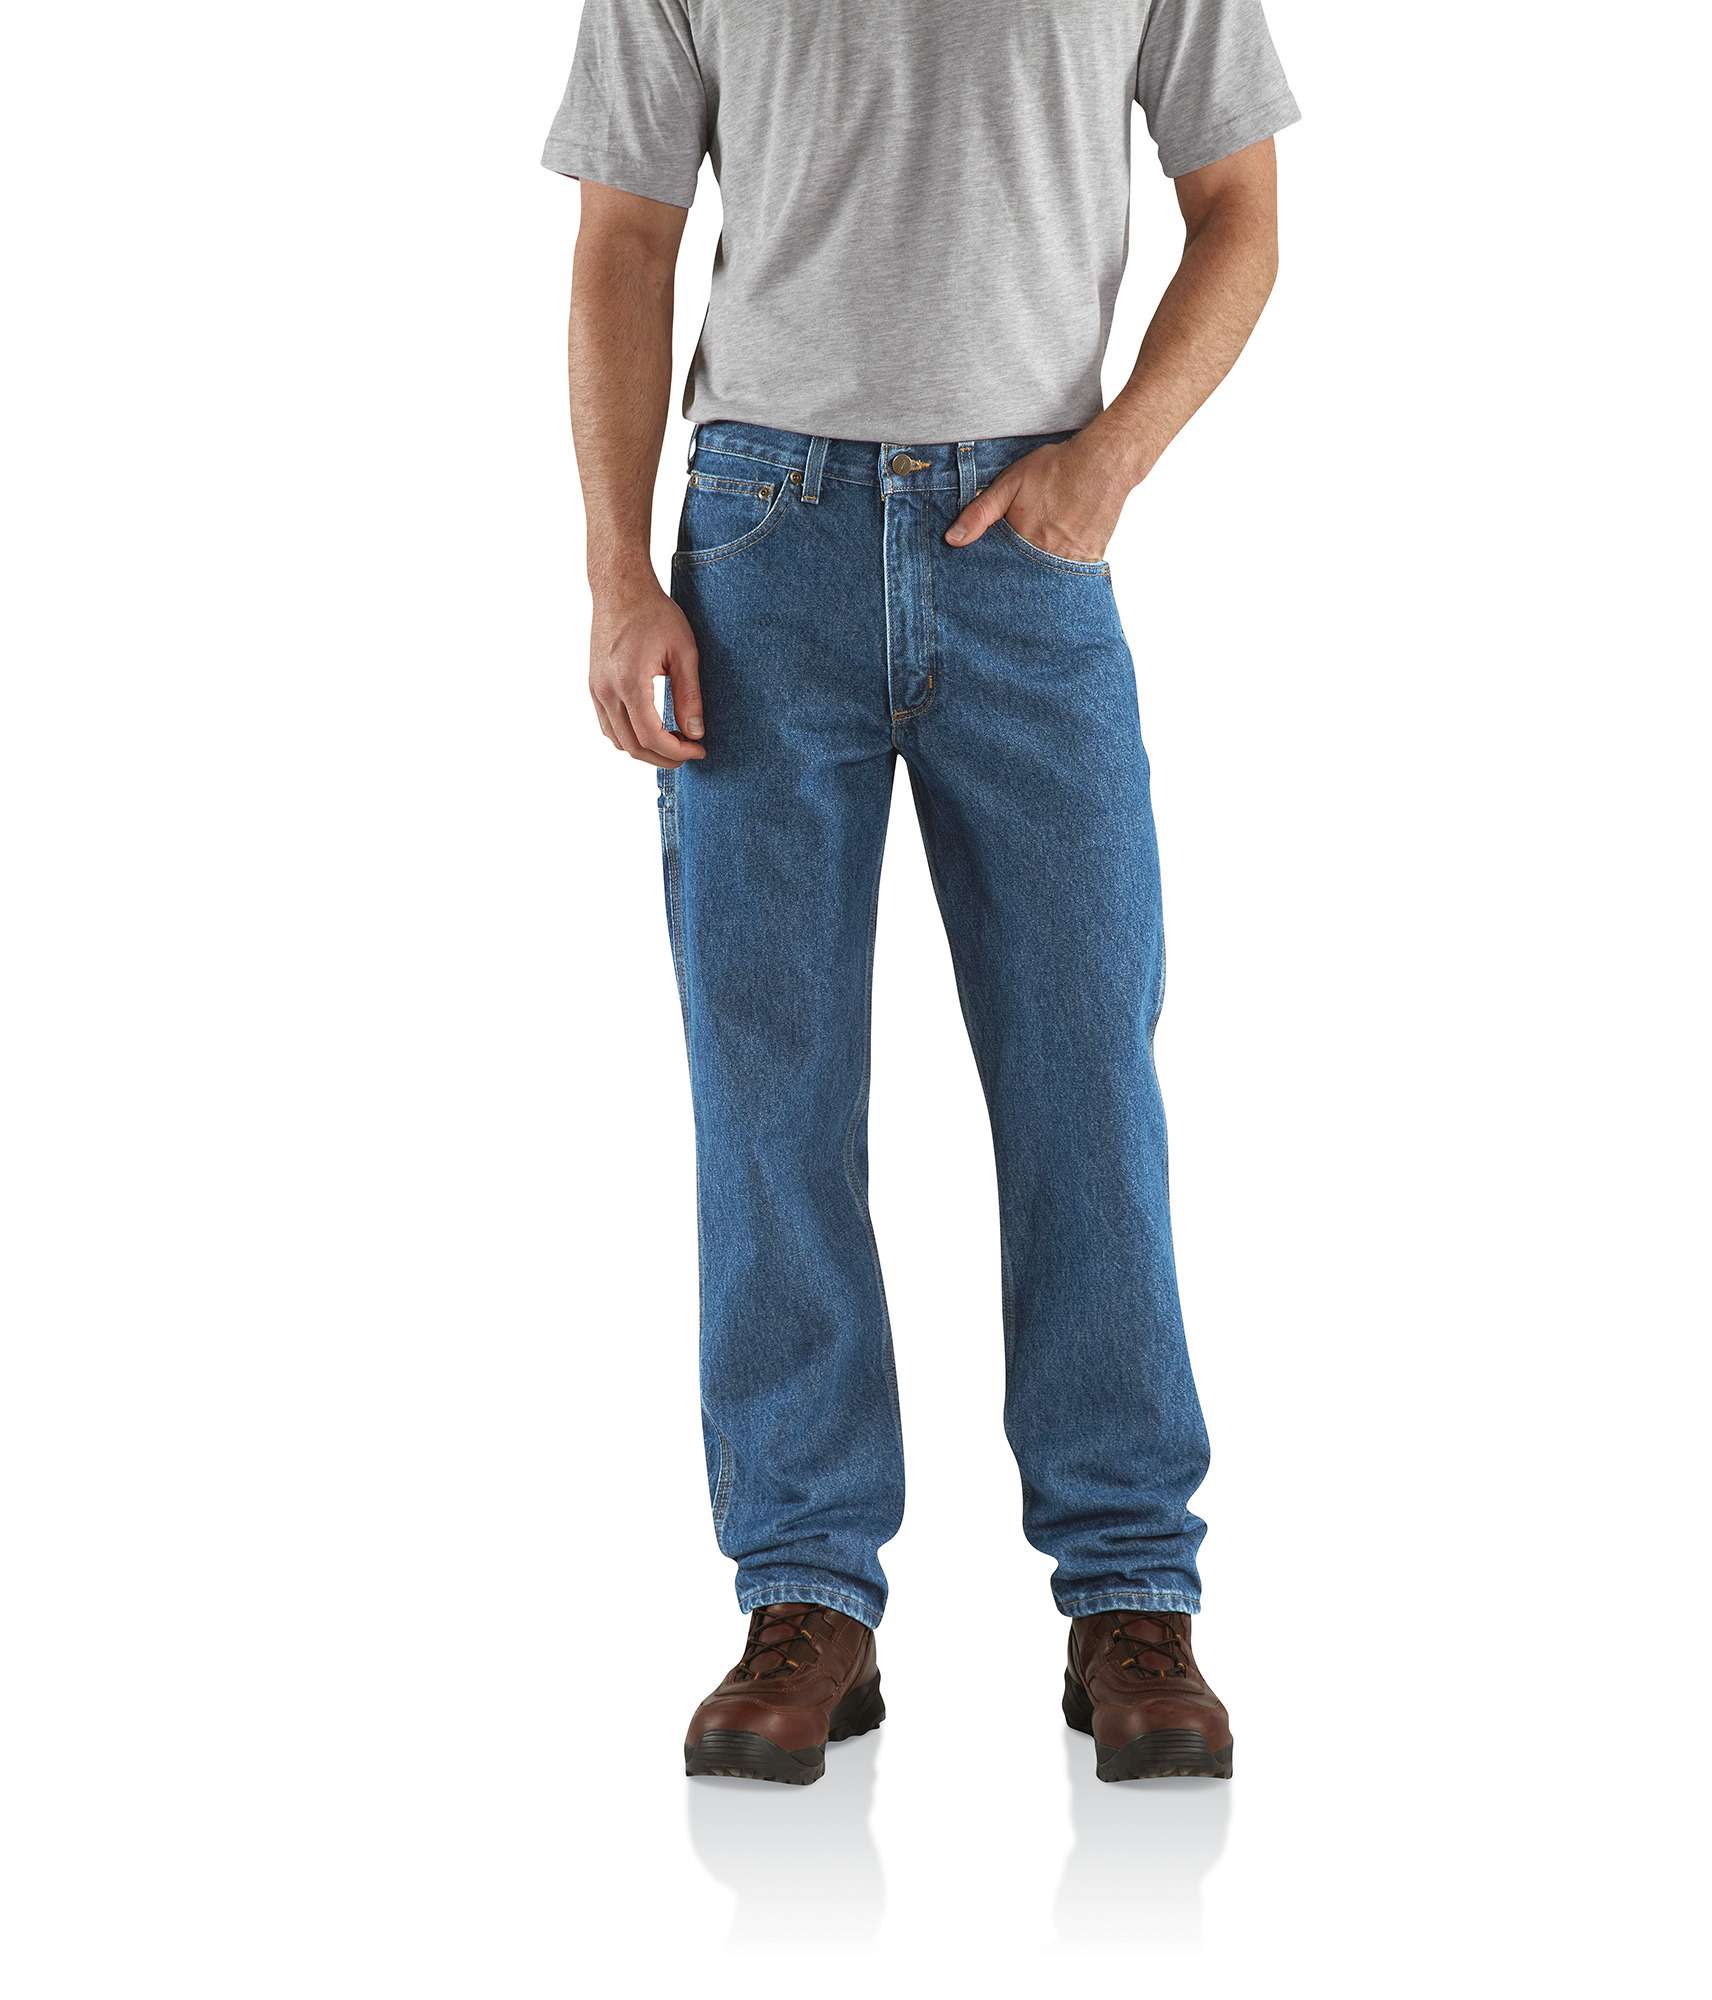 Men's Loose fit Jeans, New Collection